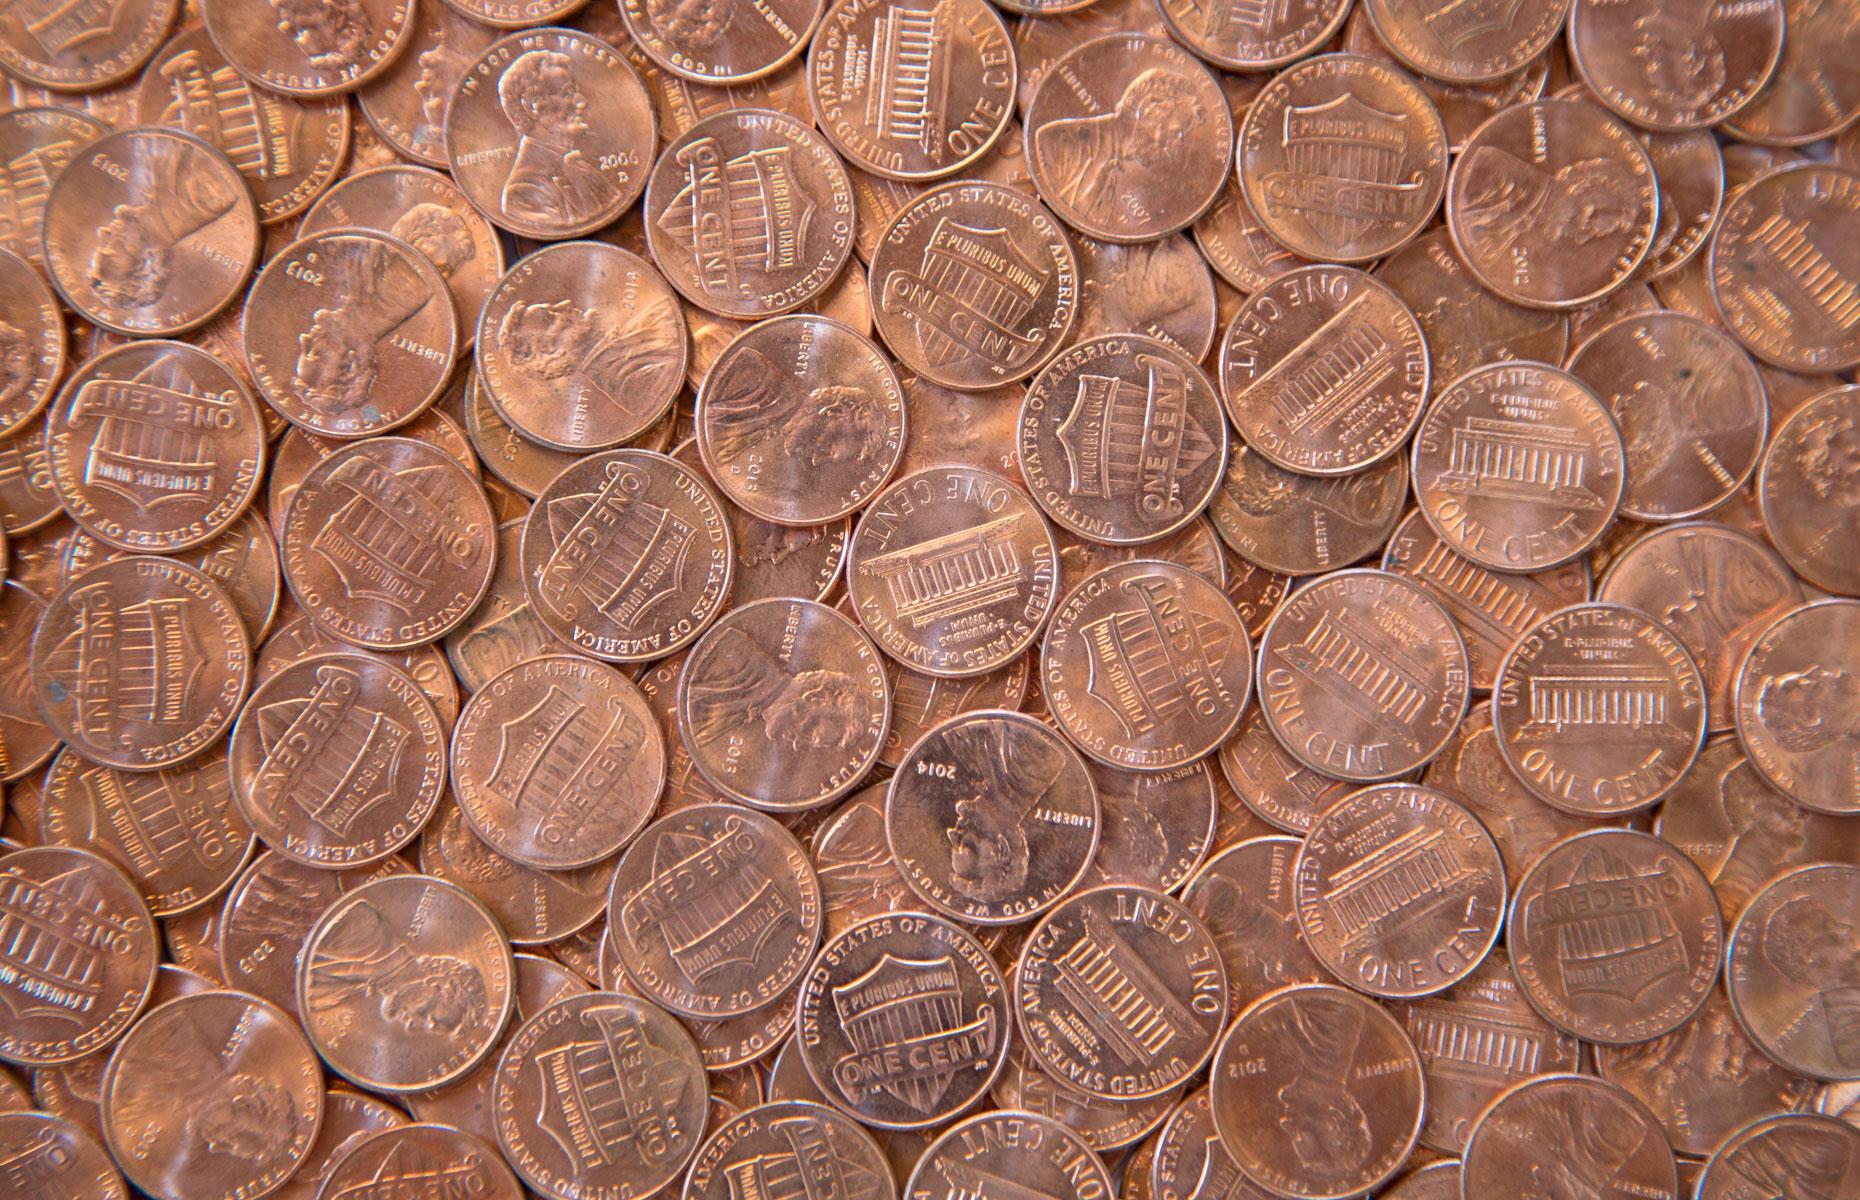 Each US penny costs more than double its face value to manufacture